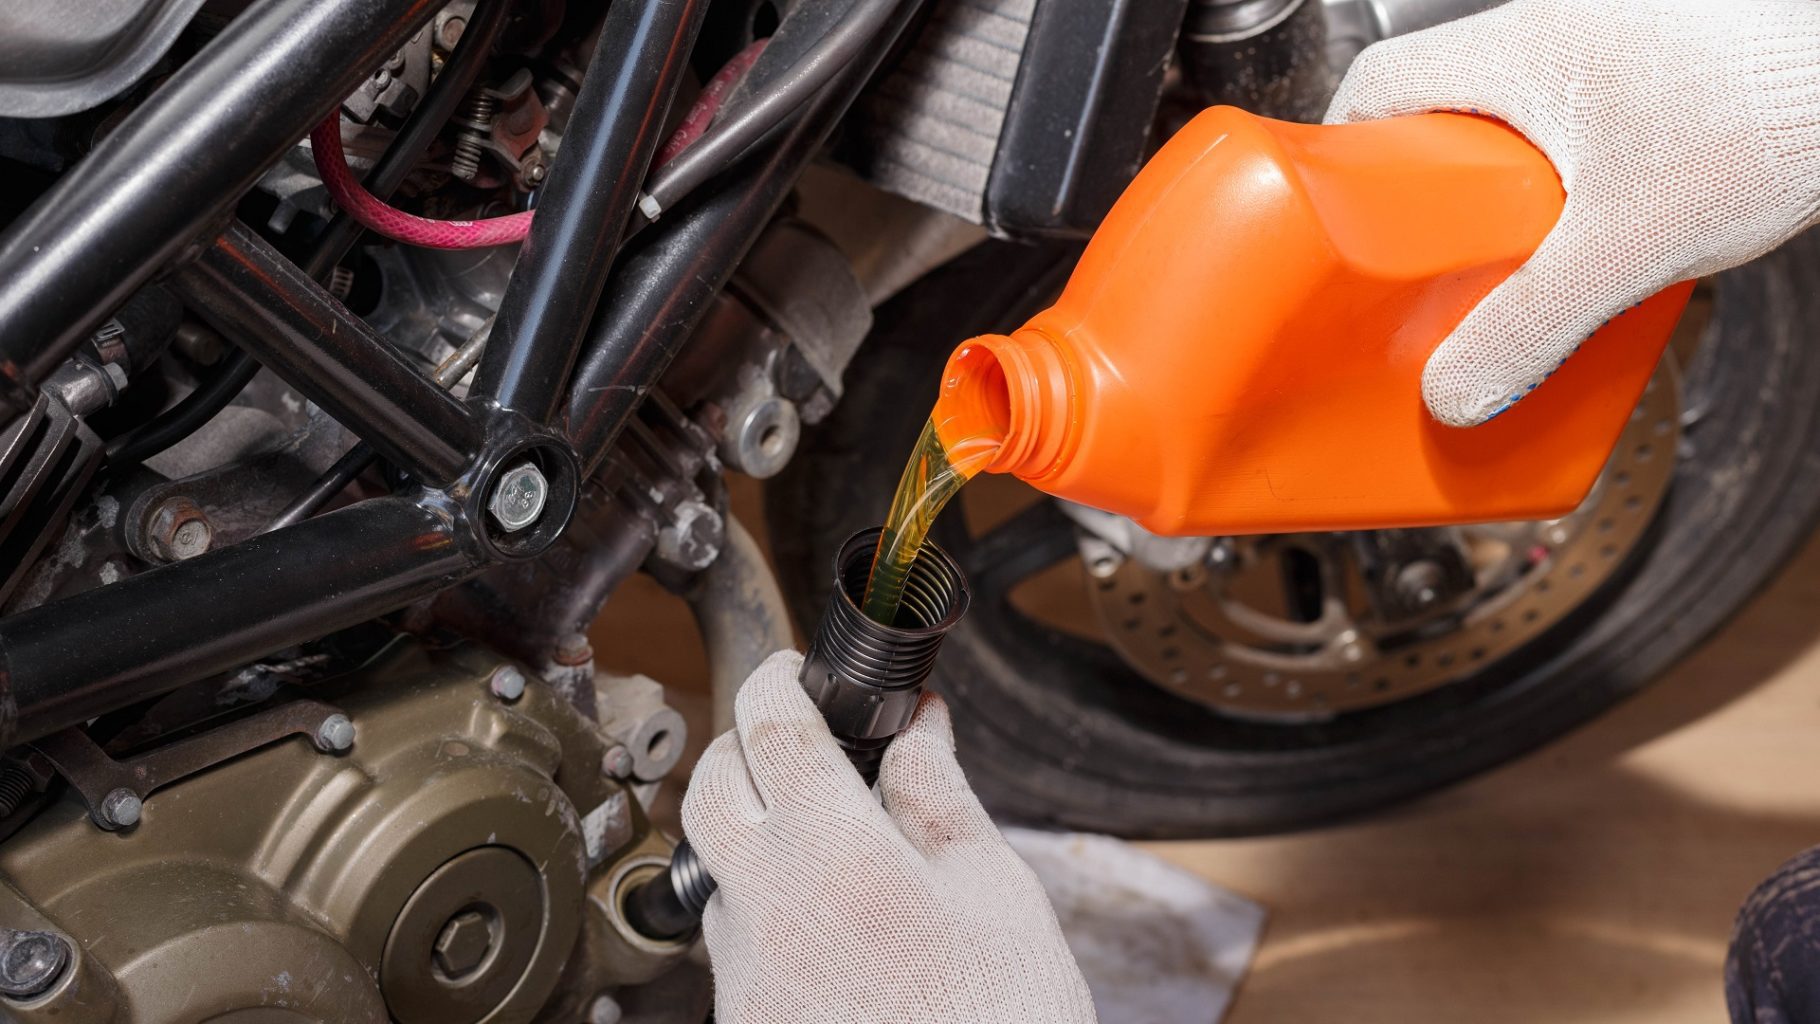 How to Change Oil on a Motorcycle